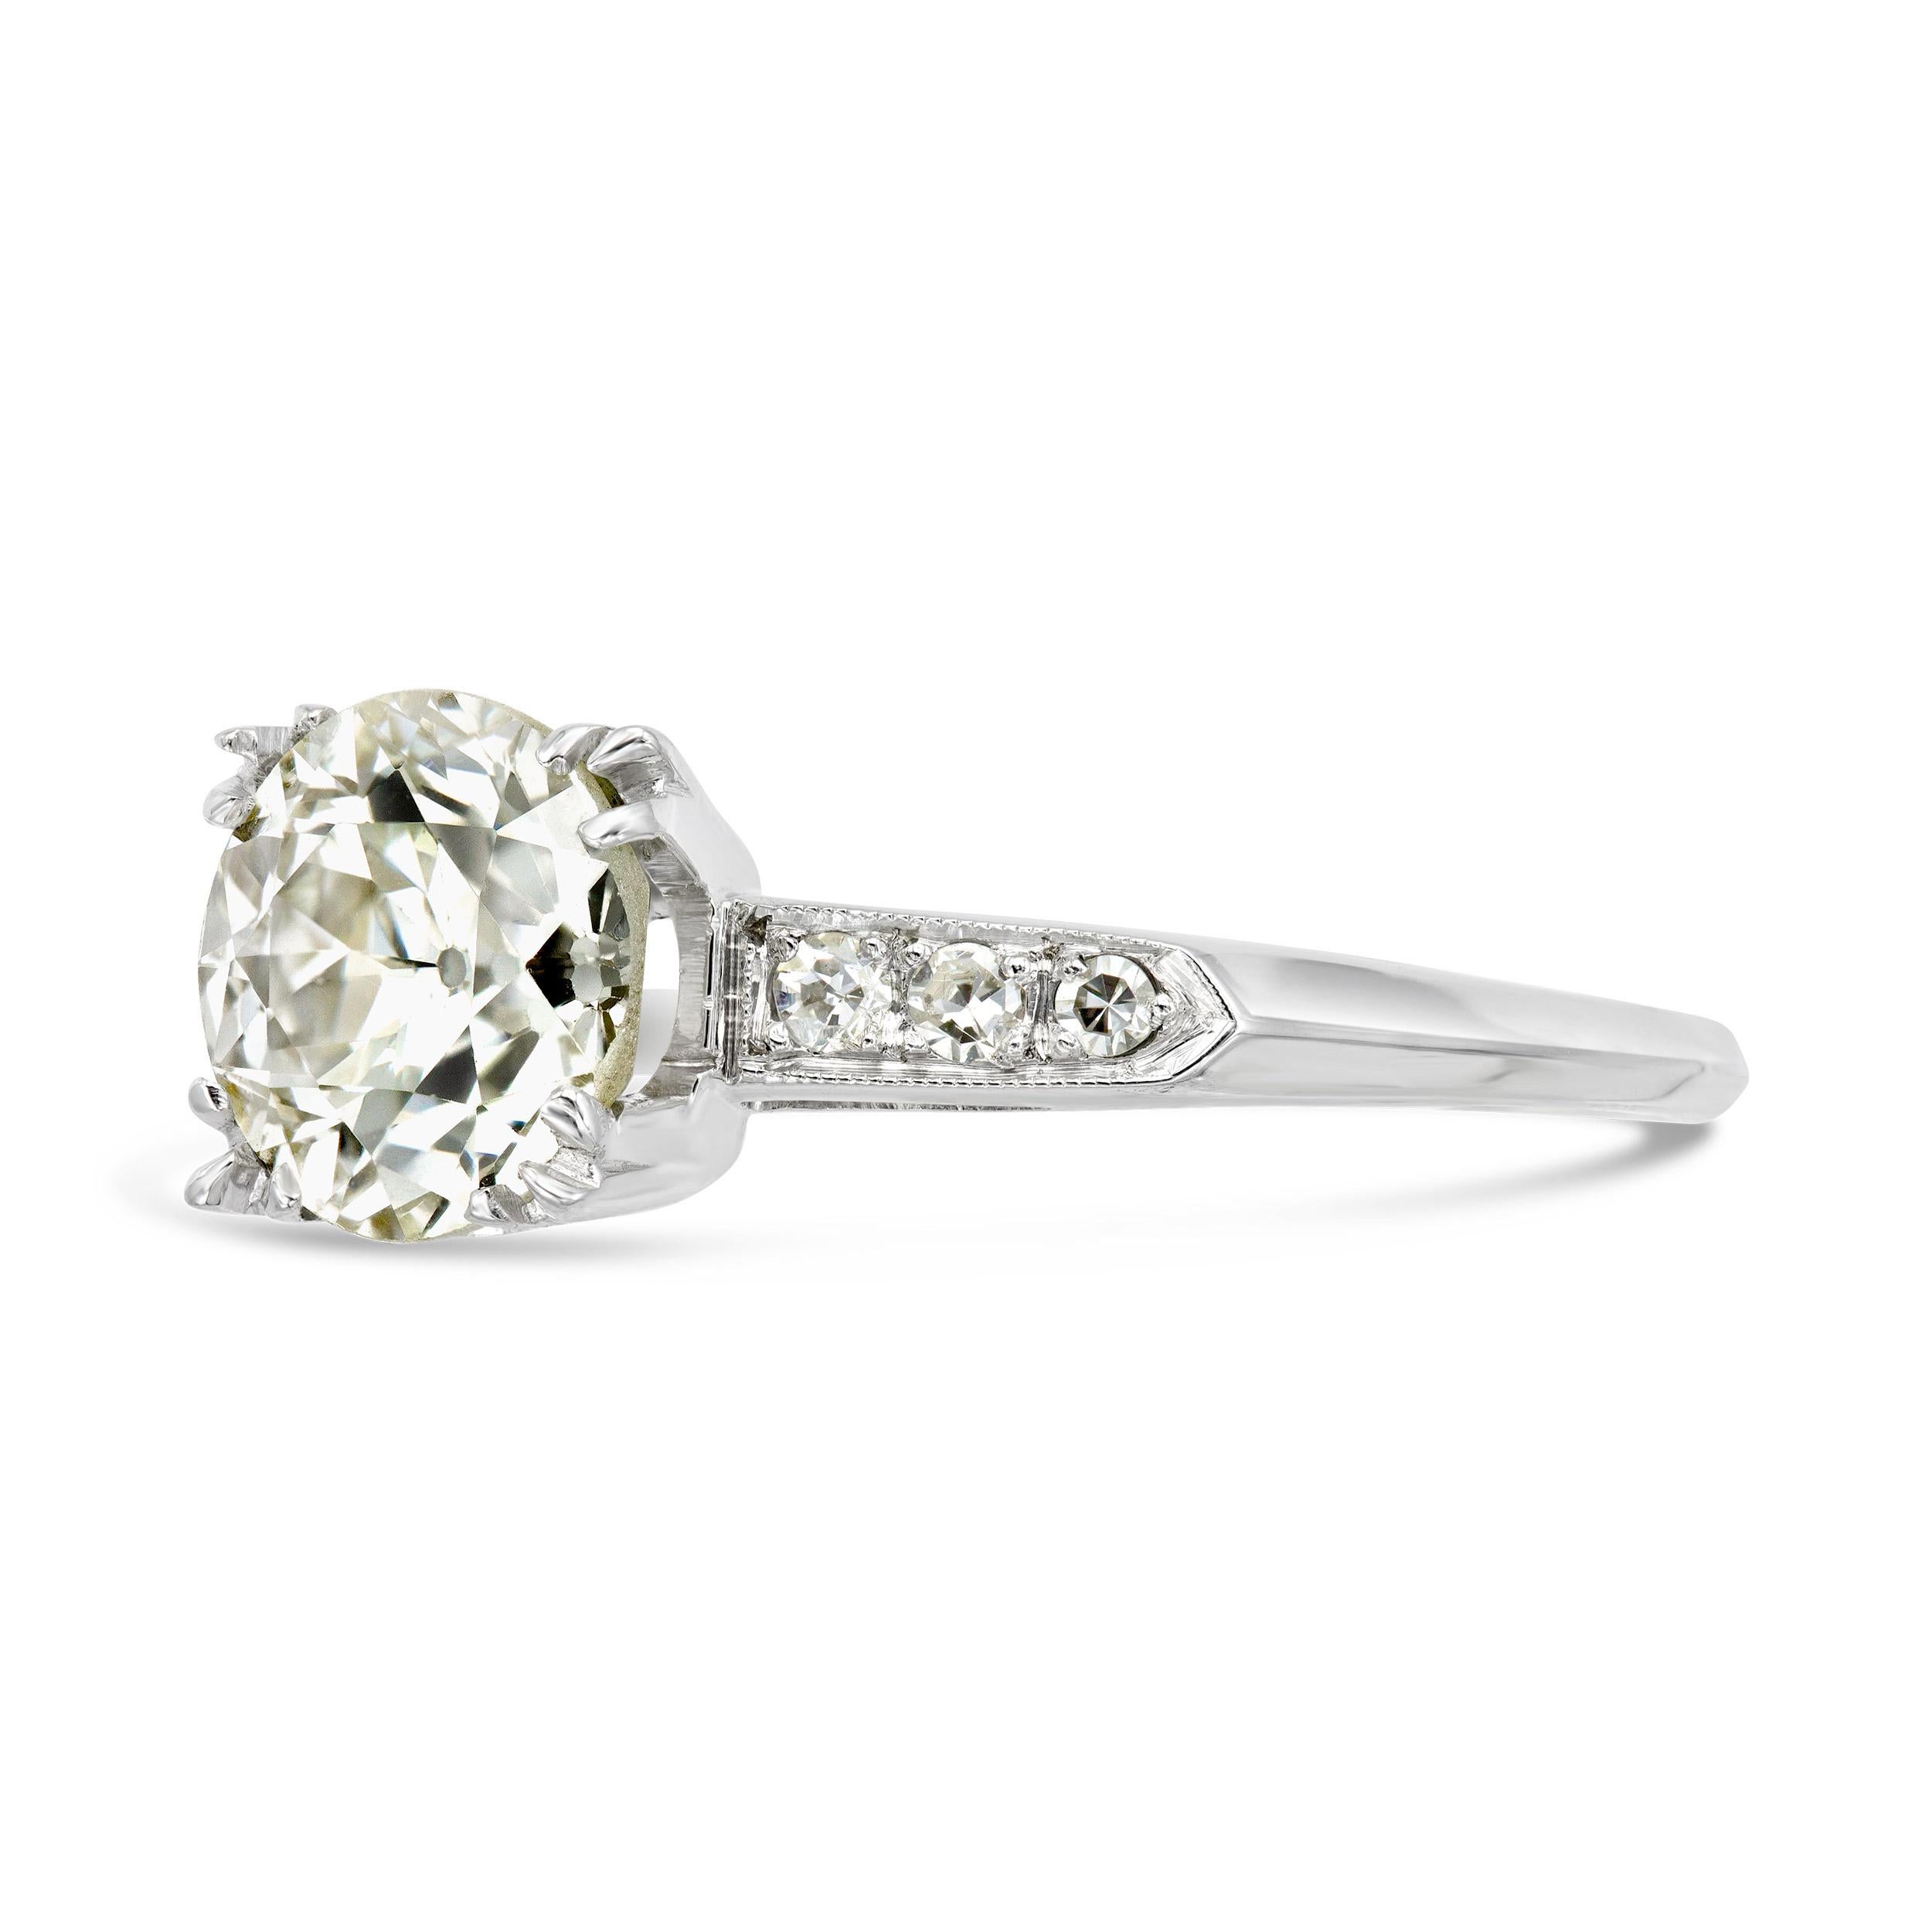 This timeless art deco engagement ring is centered by a 1.78 carat old European diamond with crisp, beautiful facets that sparkle with every movement. All the classic elements of the deco era are present; milgrain shoulders, fishtail prongs, and a